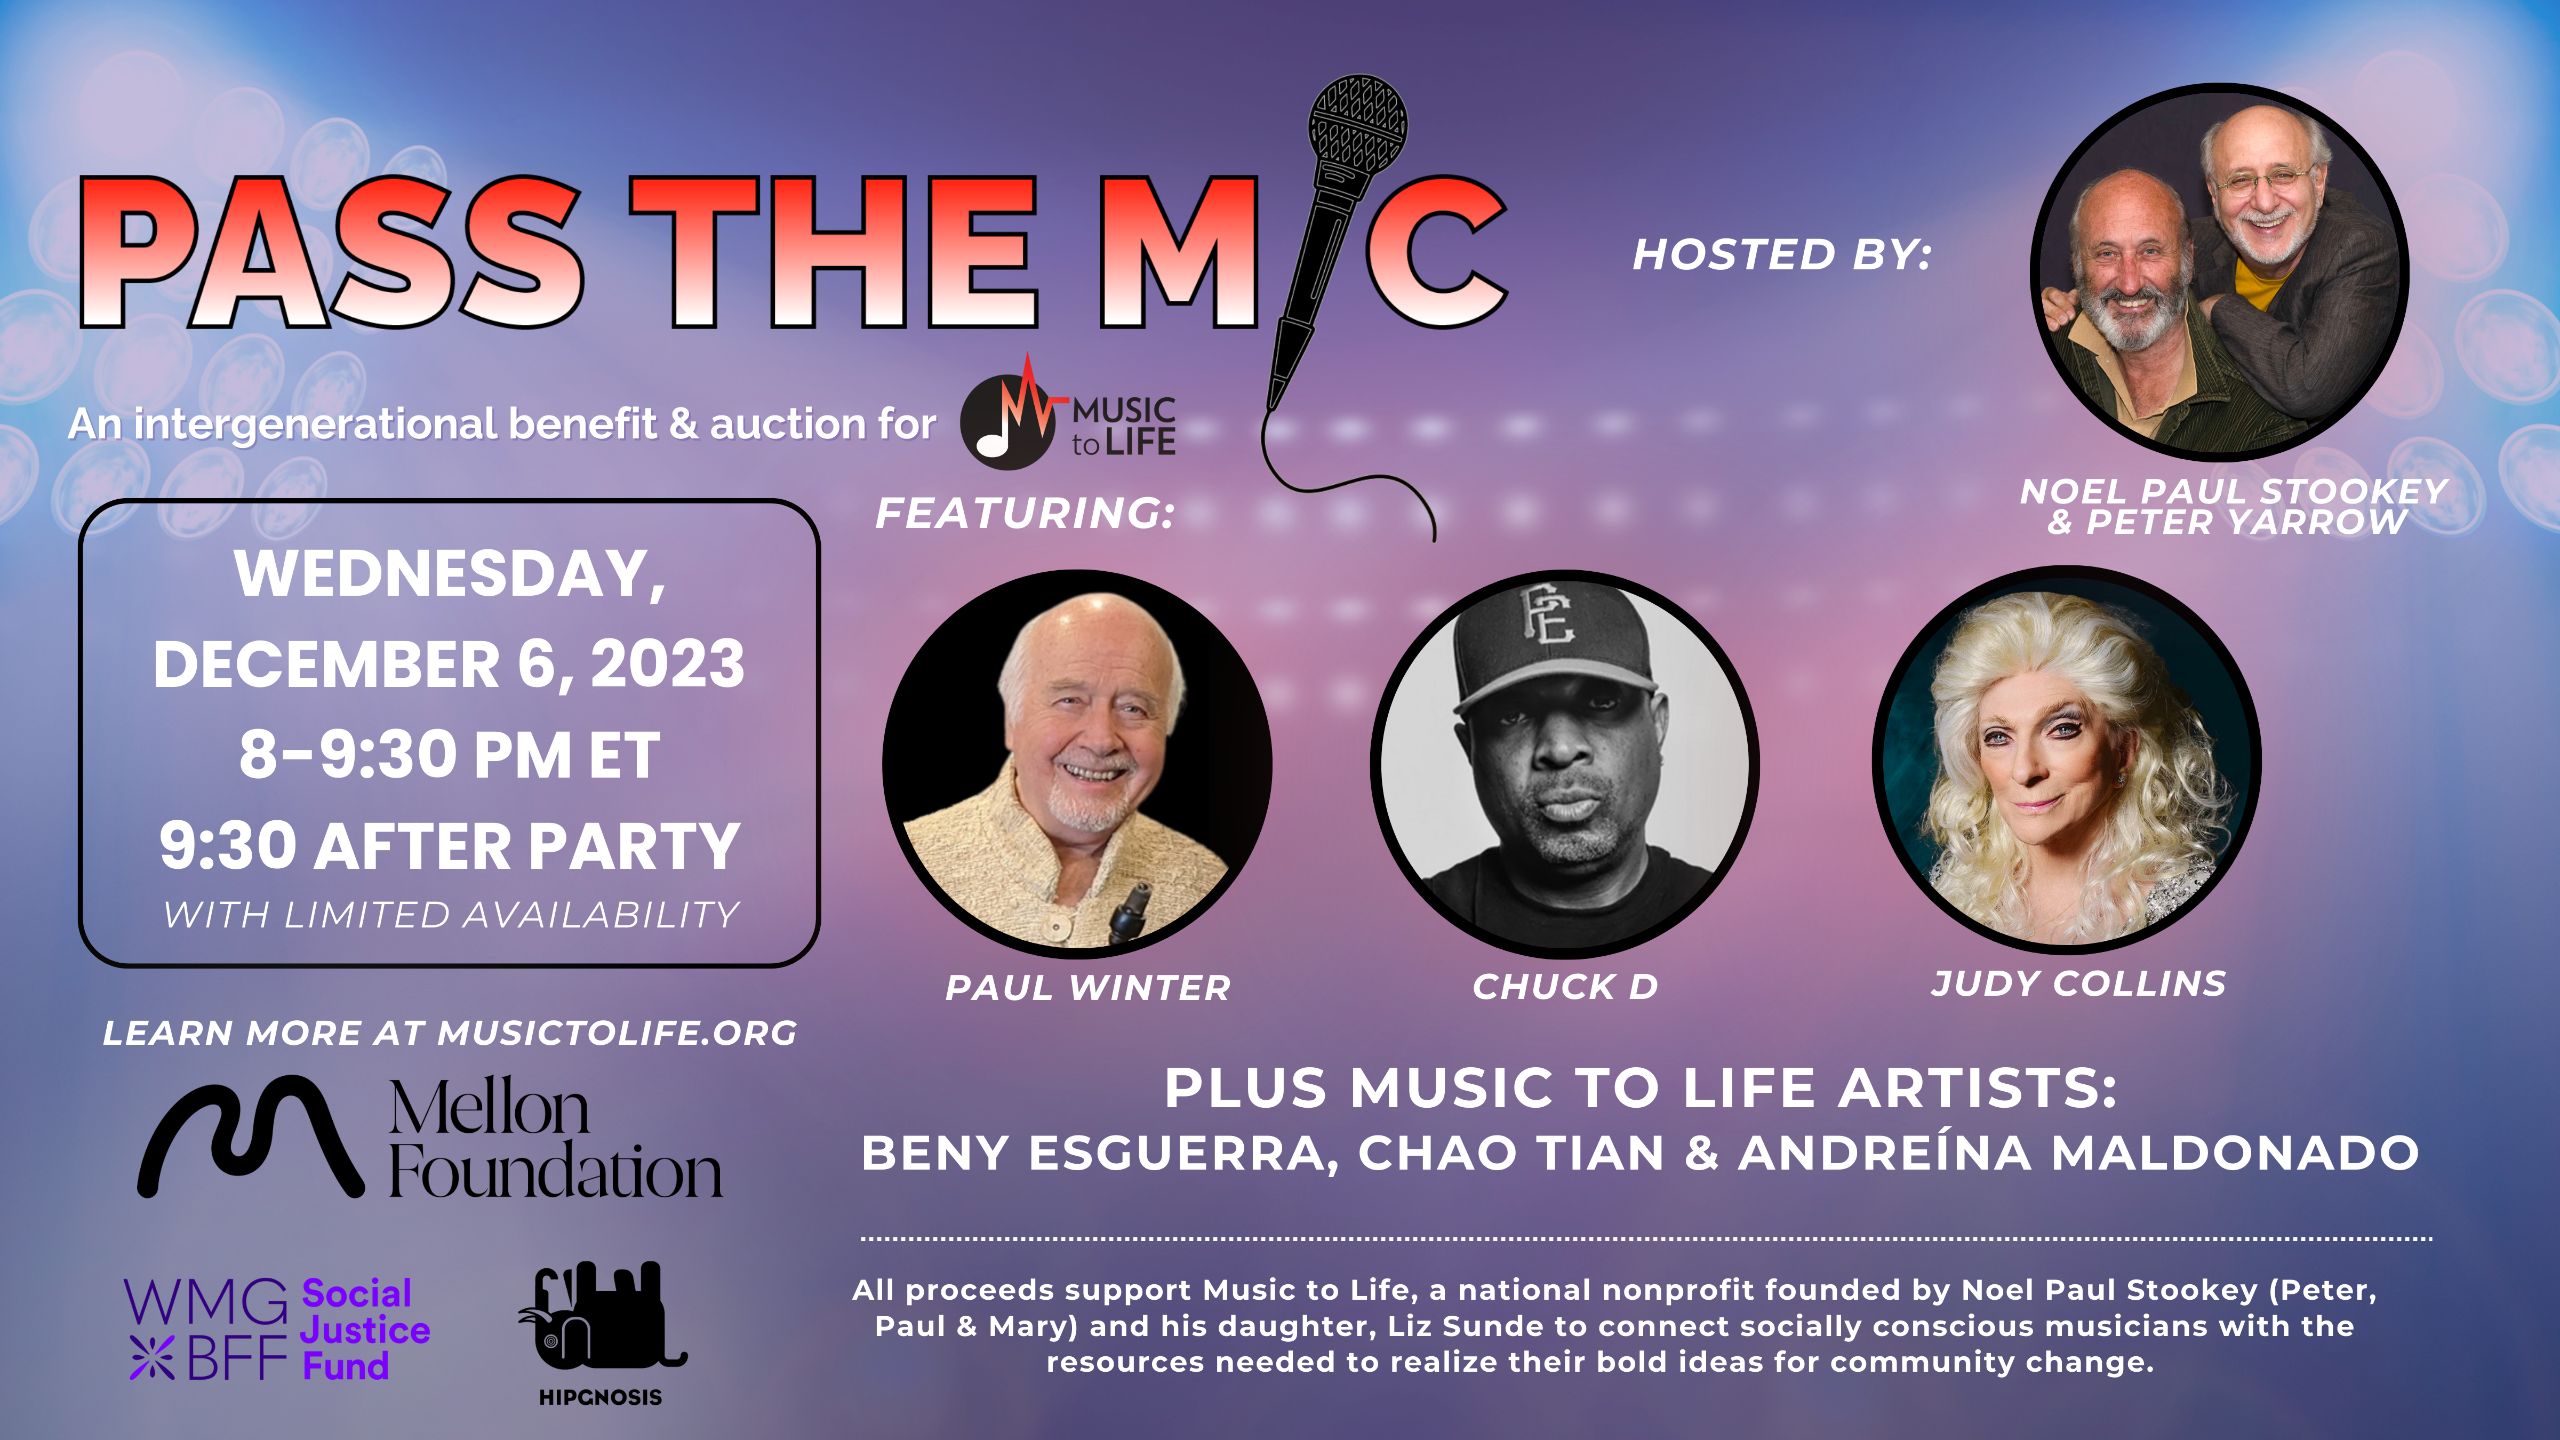 Rewatch Pass the Mic: Stories of Music & Social Justice Across Generations